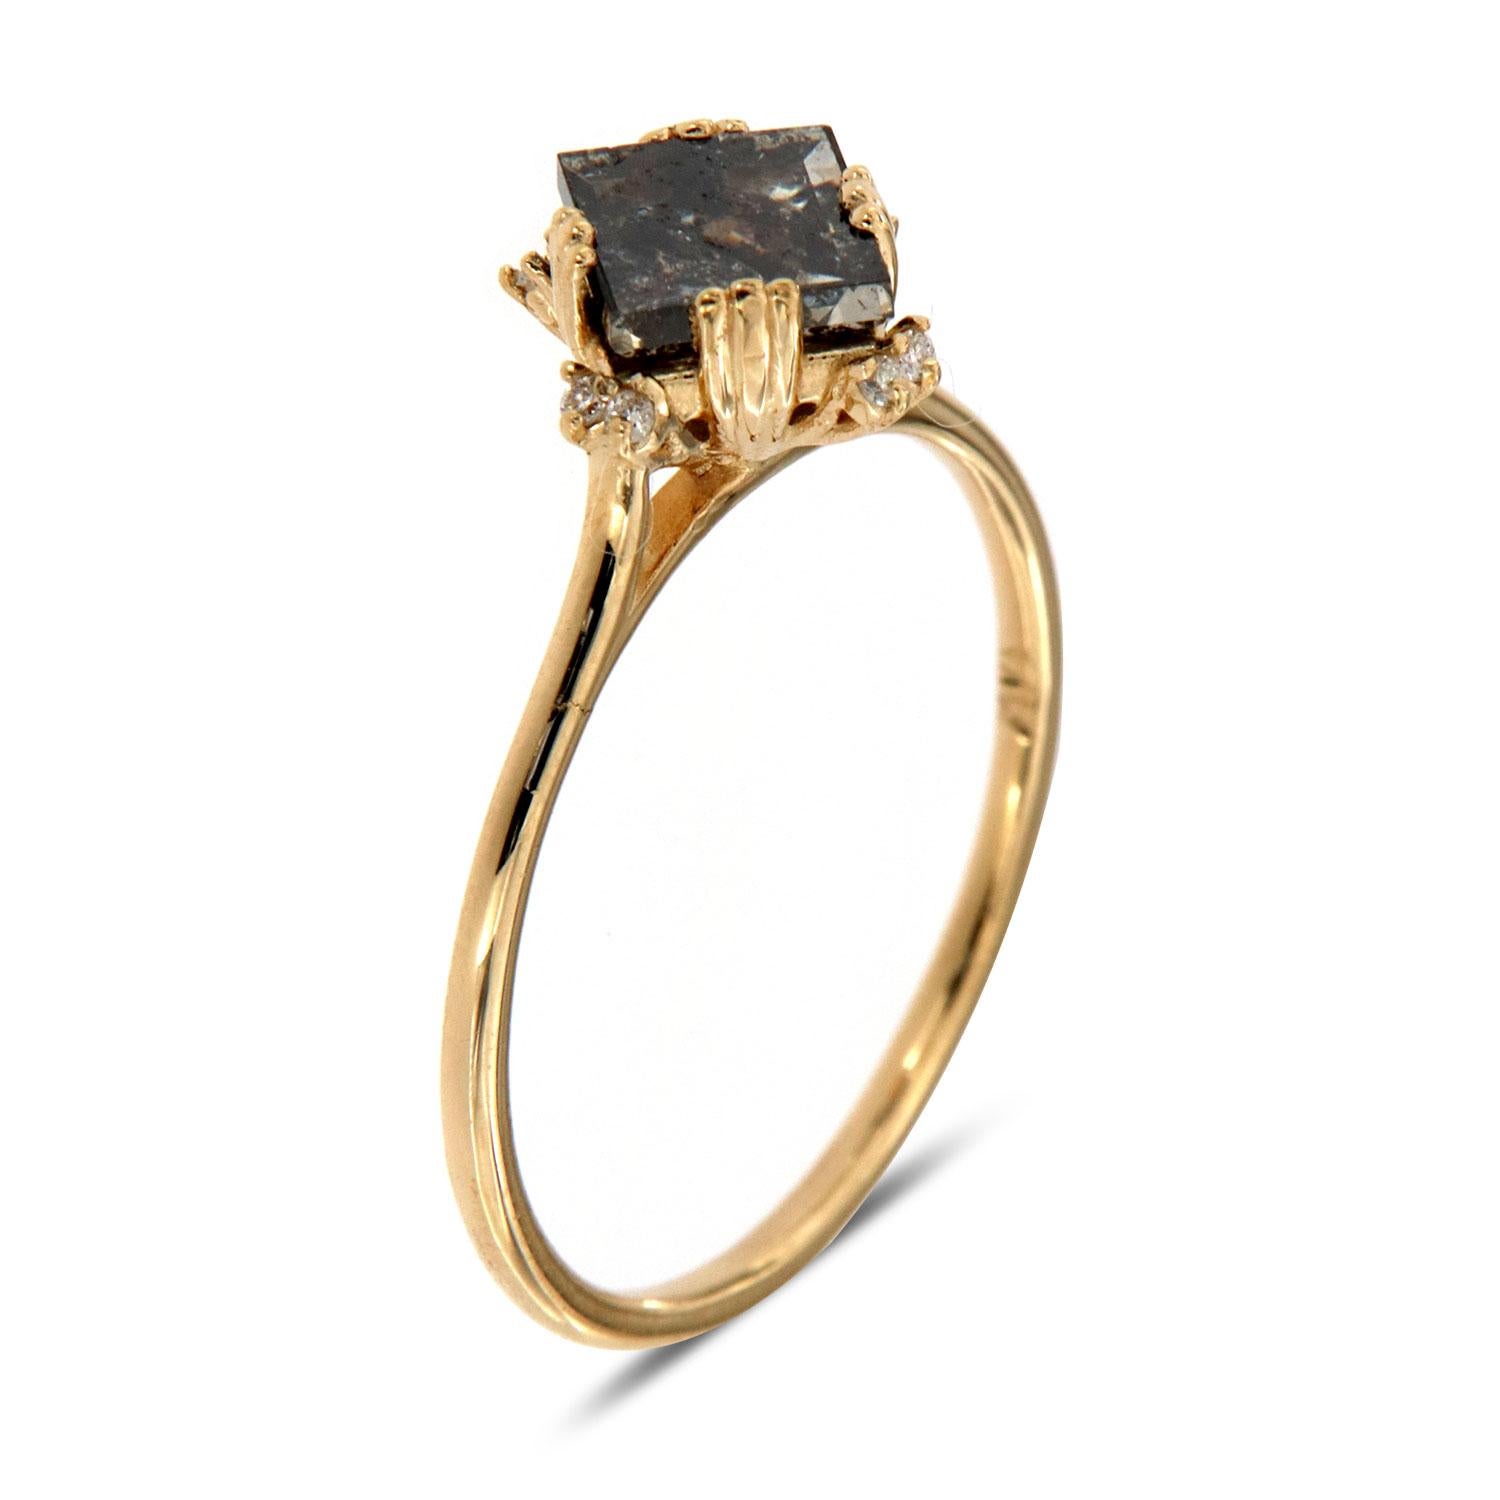 This Delicate ring features a 0.82-Carat Square Salt and Pepper Natural Diamond set in twelve (12) tiny prongs on top of a 1.2 mm band. Eight(8) brilliant round diamonds evenly scattered underneath the crown to enhance its Earthy and organic look.